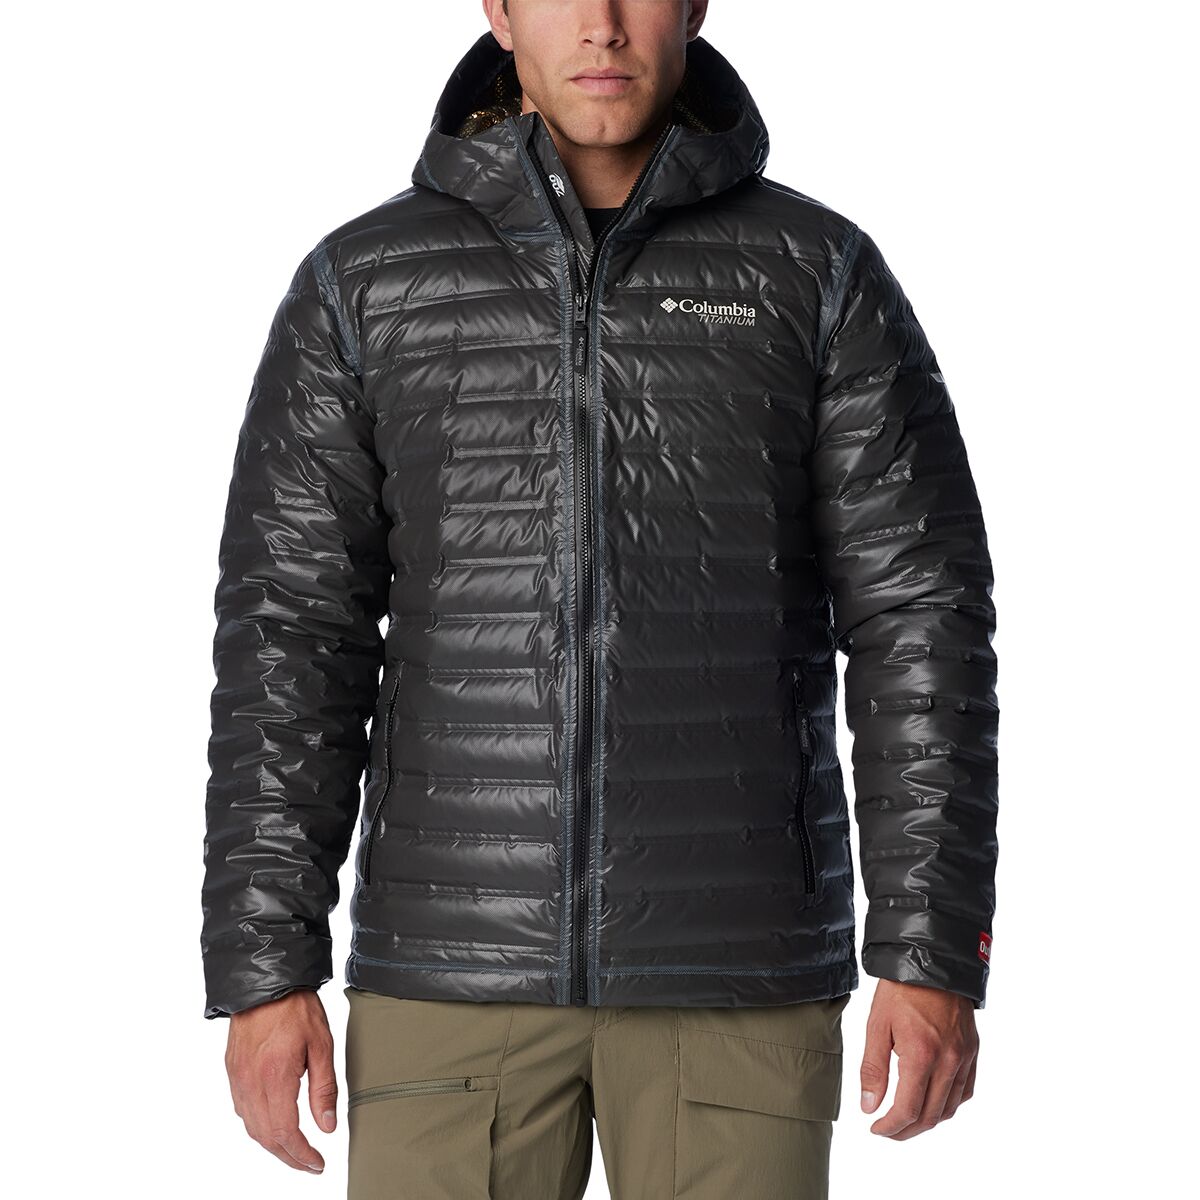 OutDry Extreme Gold Down Jacket - Men